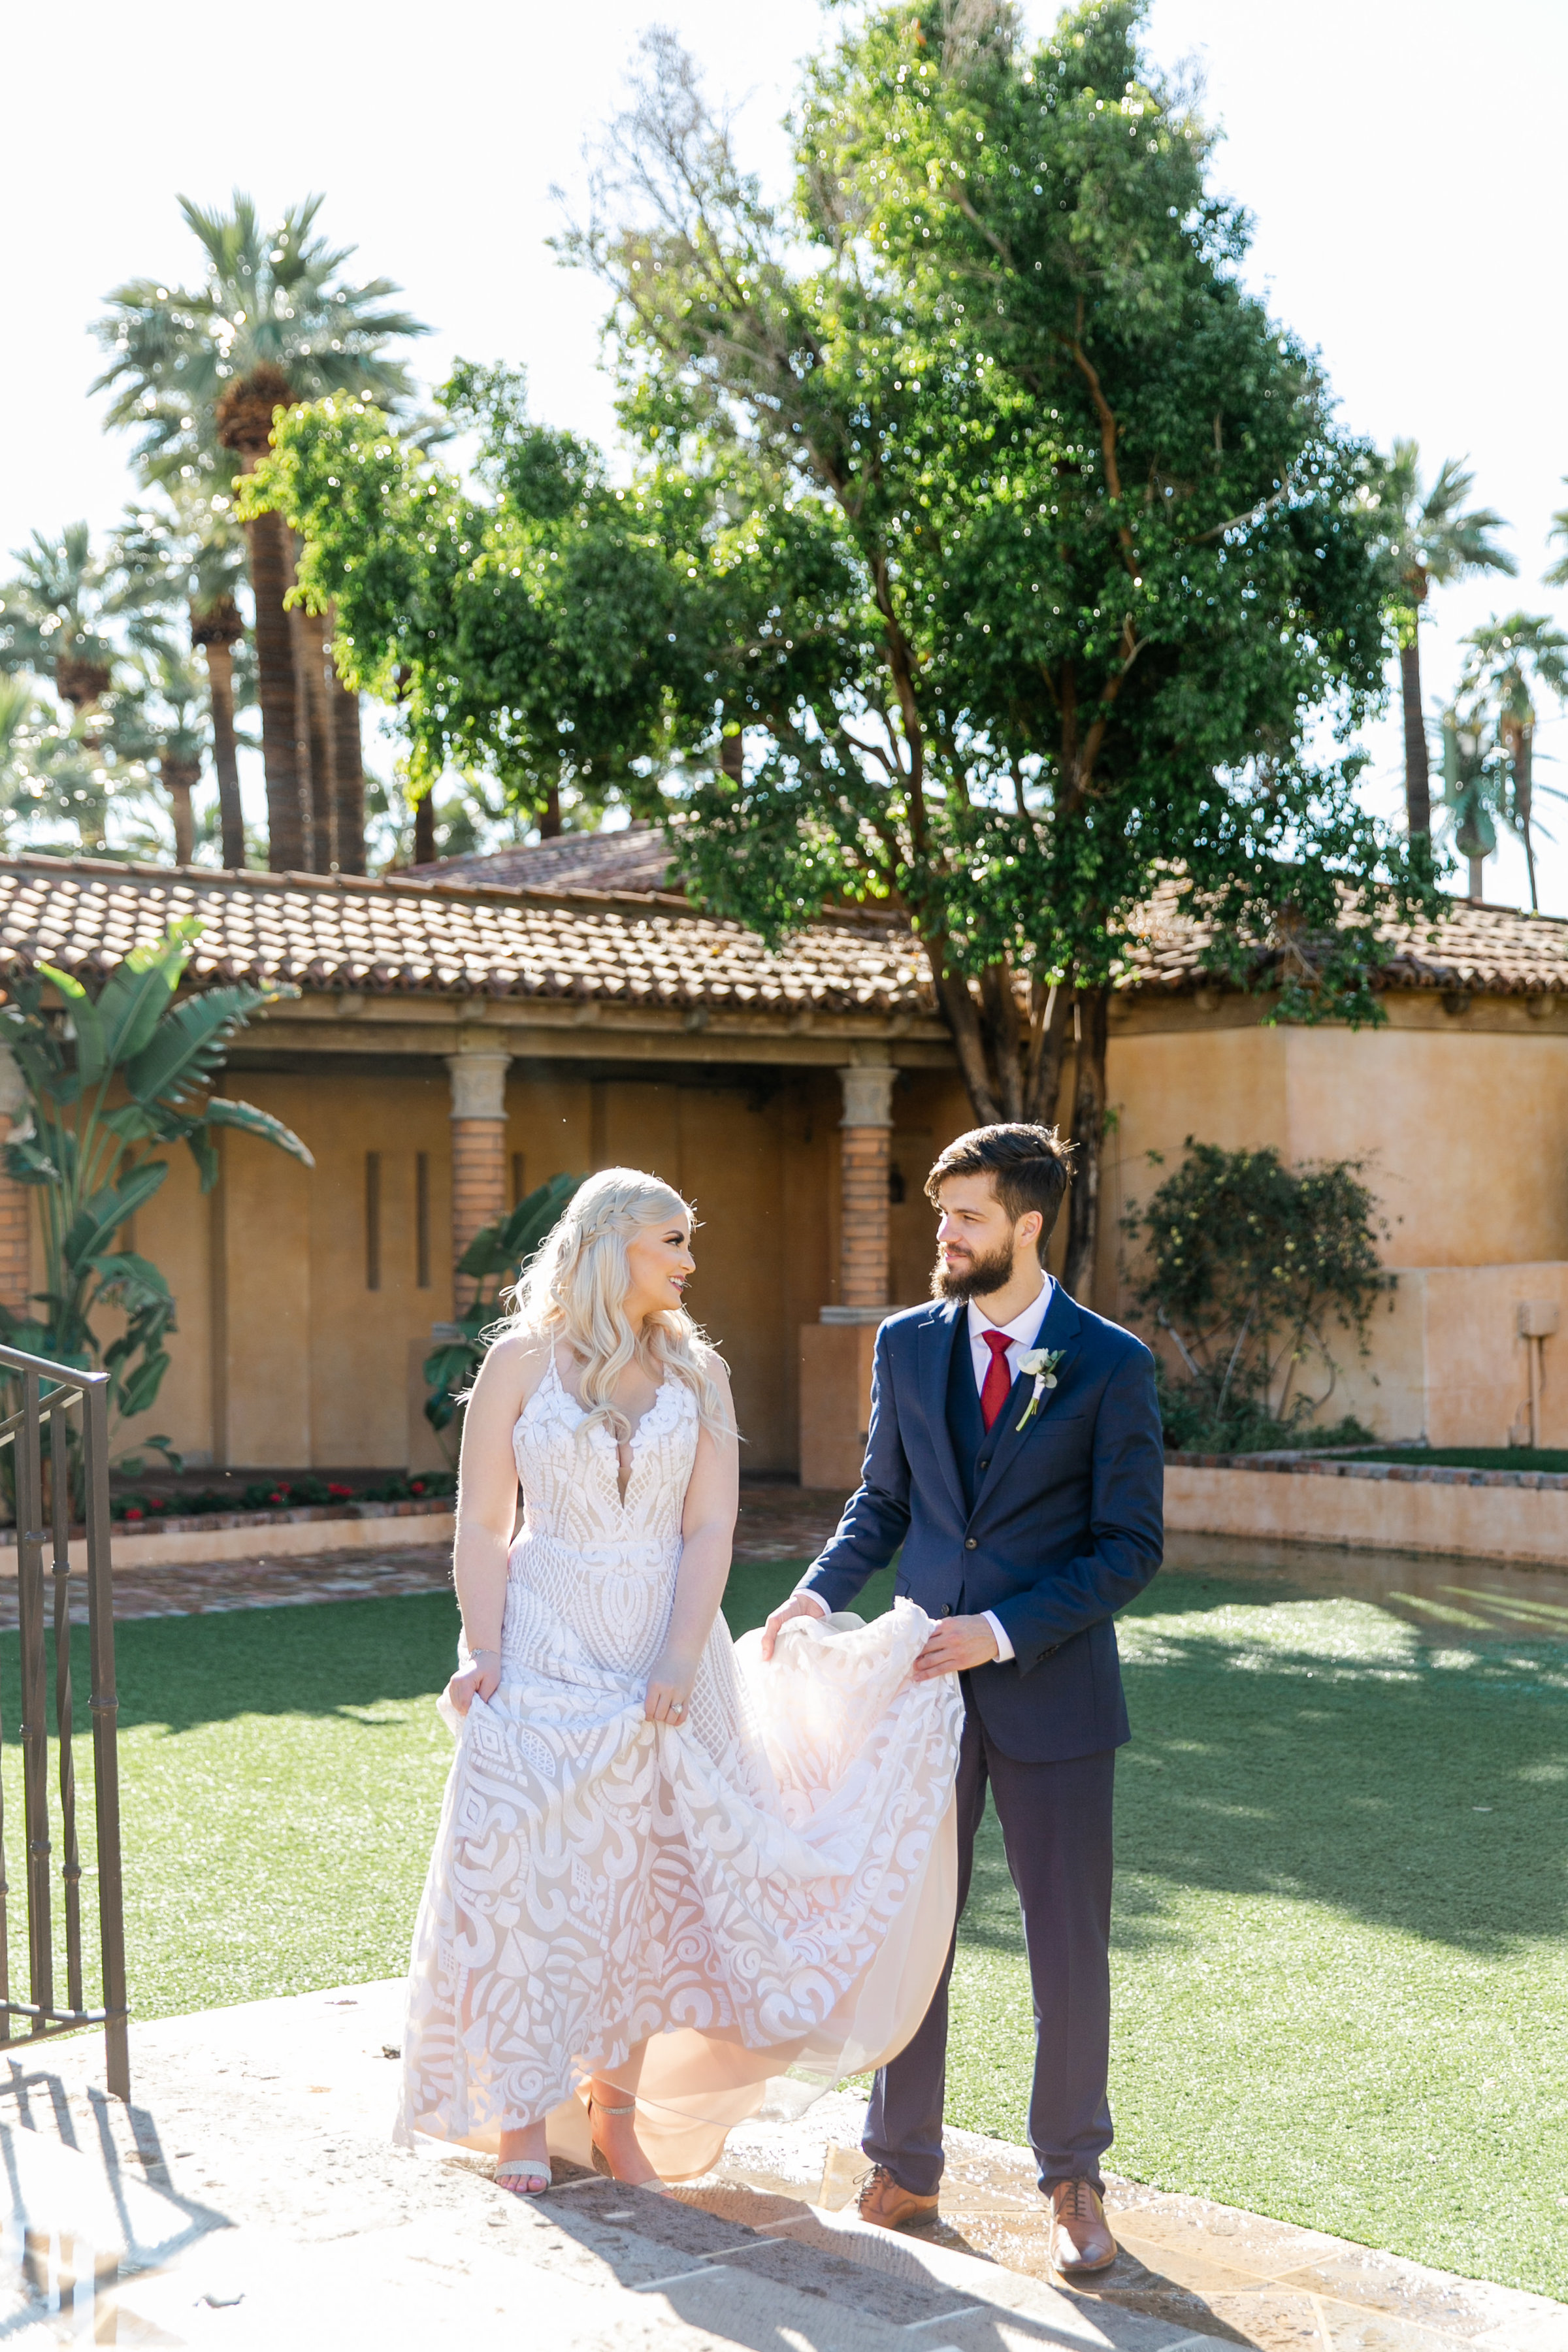 Karlie Colleen Photography - The Royal Palms Wedding - Some Like It Classic - Alex & Sam-171